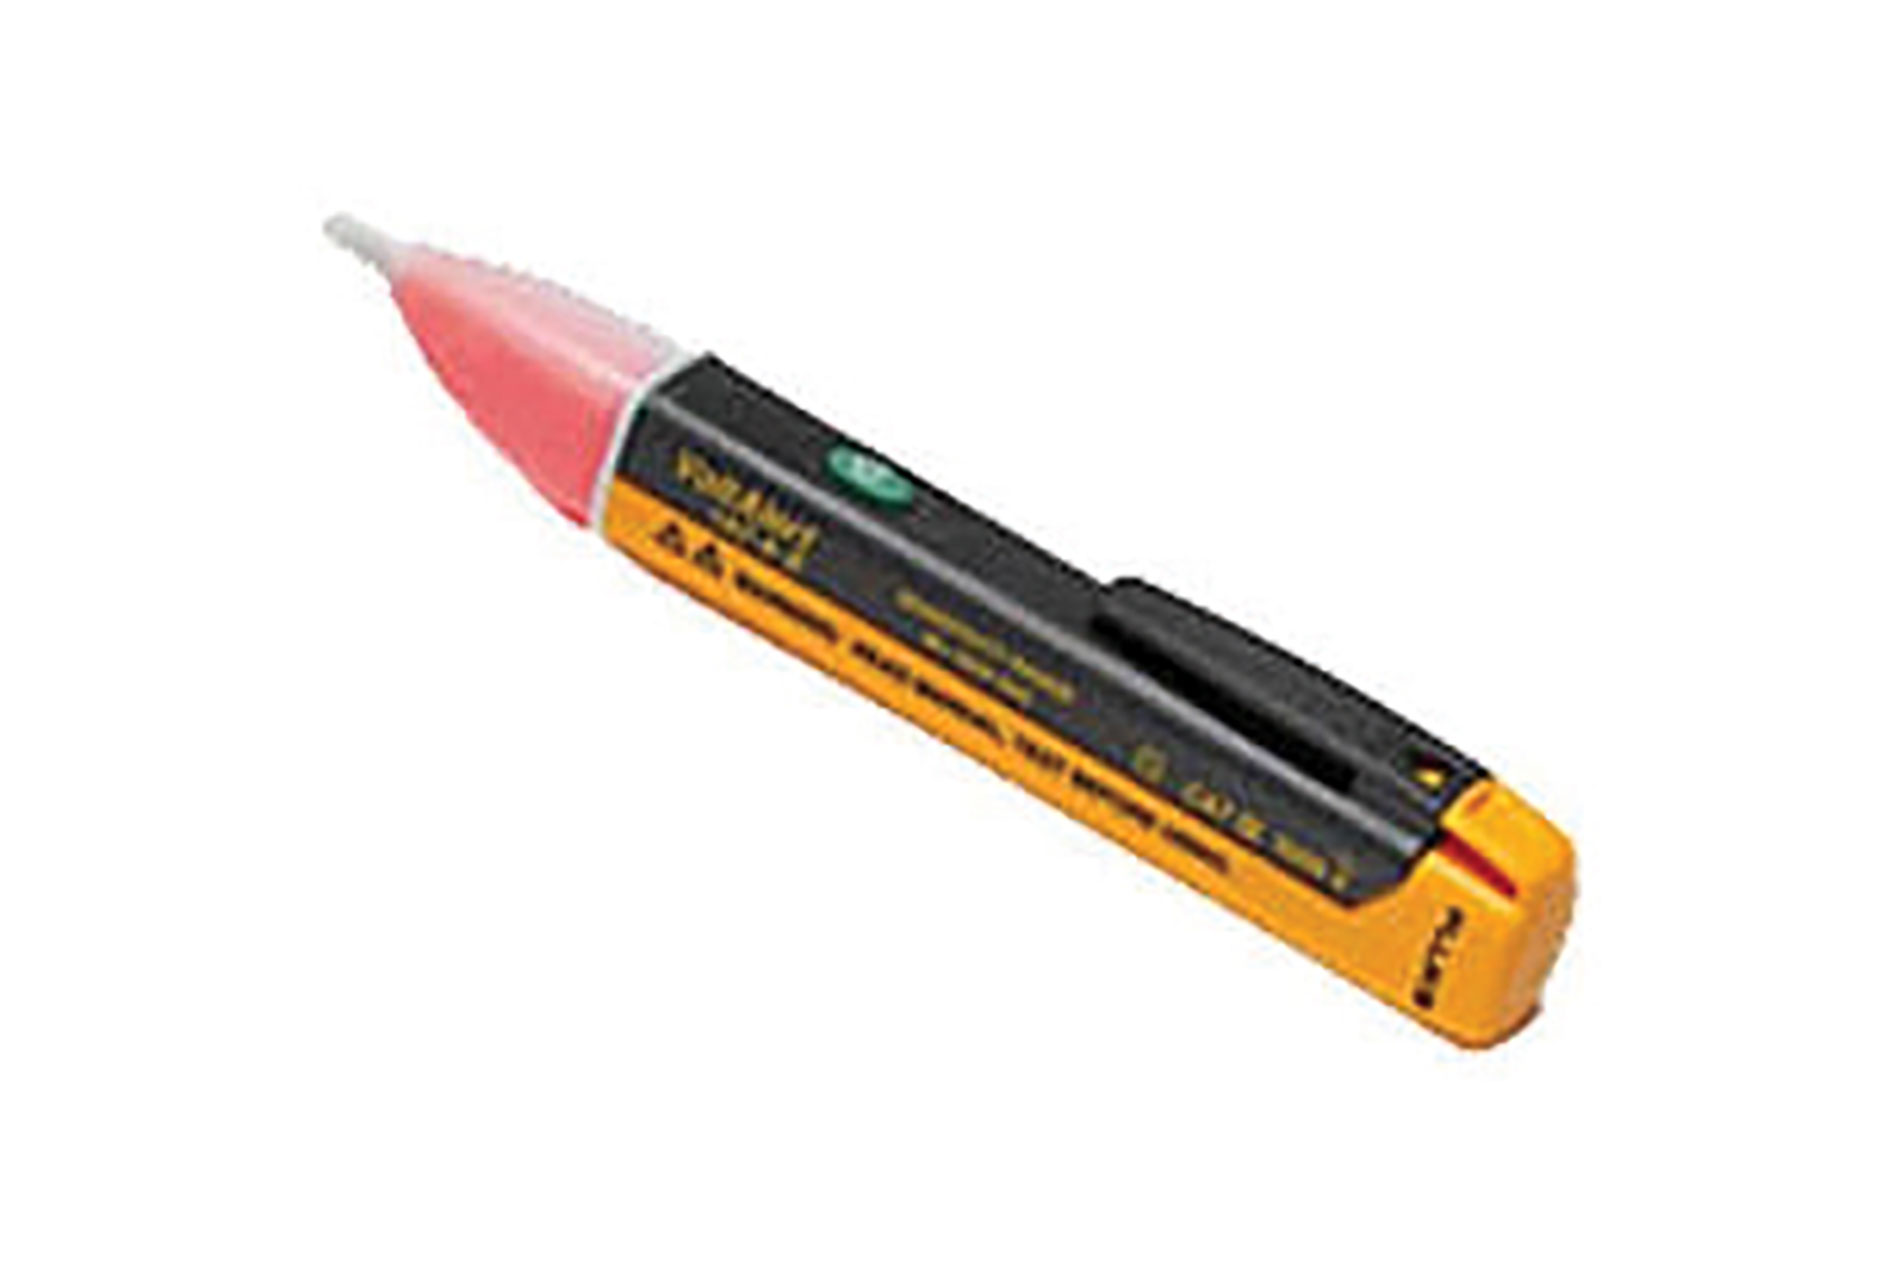 Fluke’s 1AC II noncontact voltage tester